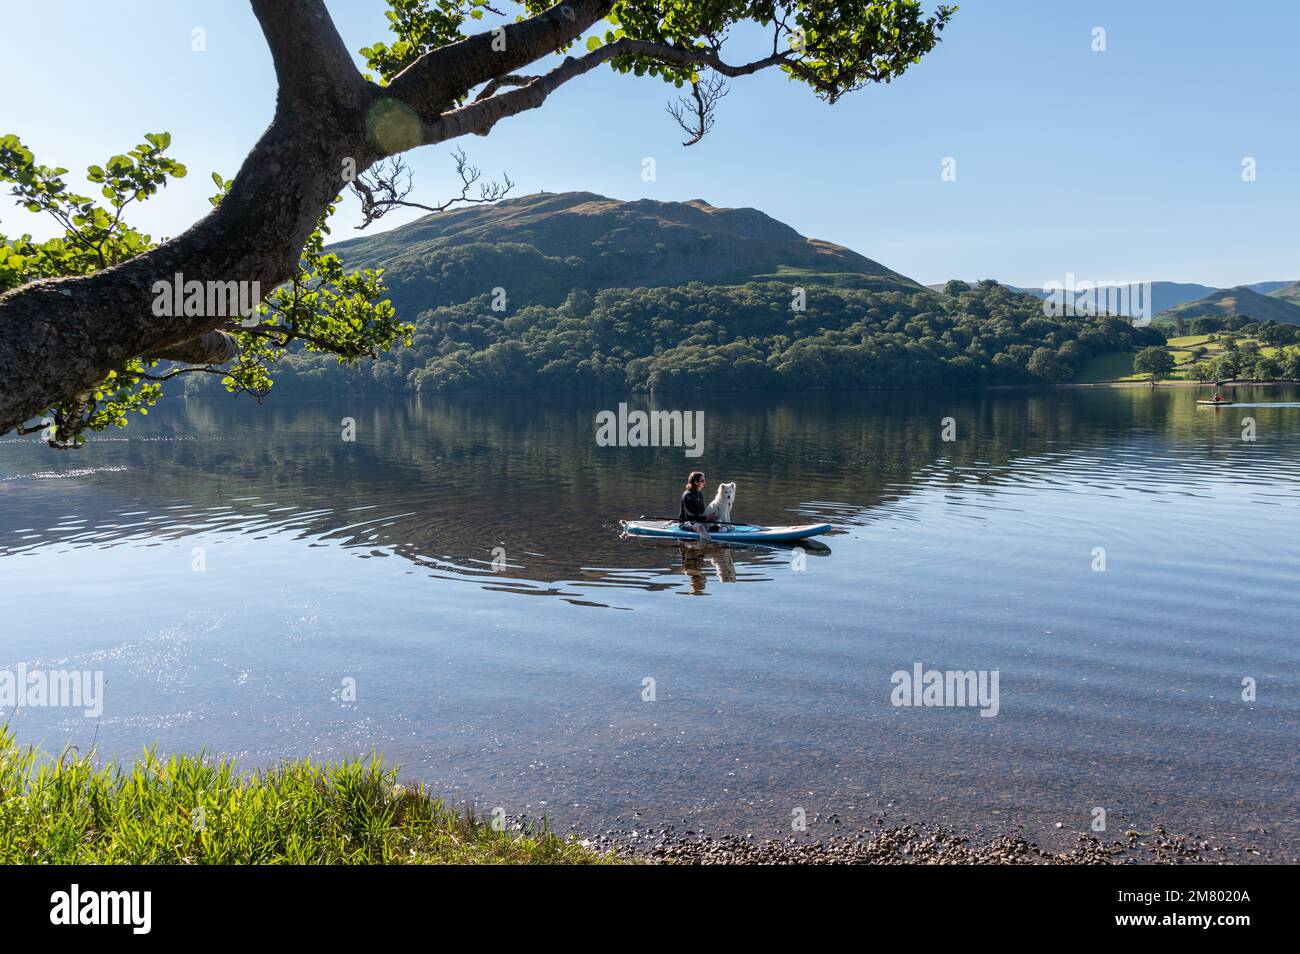 Samoyed puppy on paddleboard in Ullswater, Lake District Stock Photo